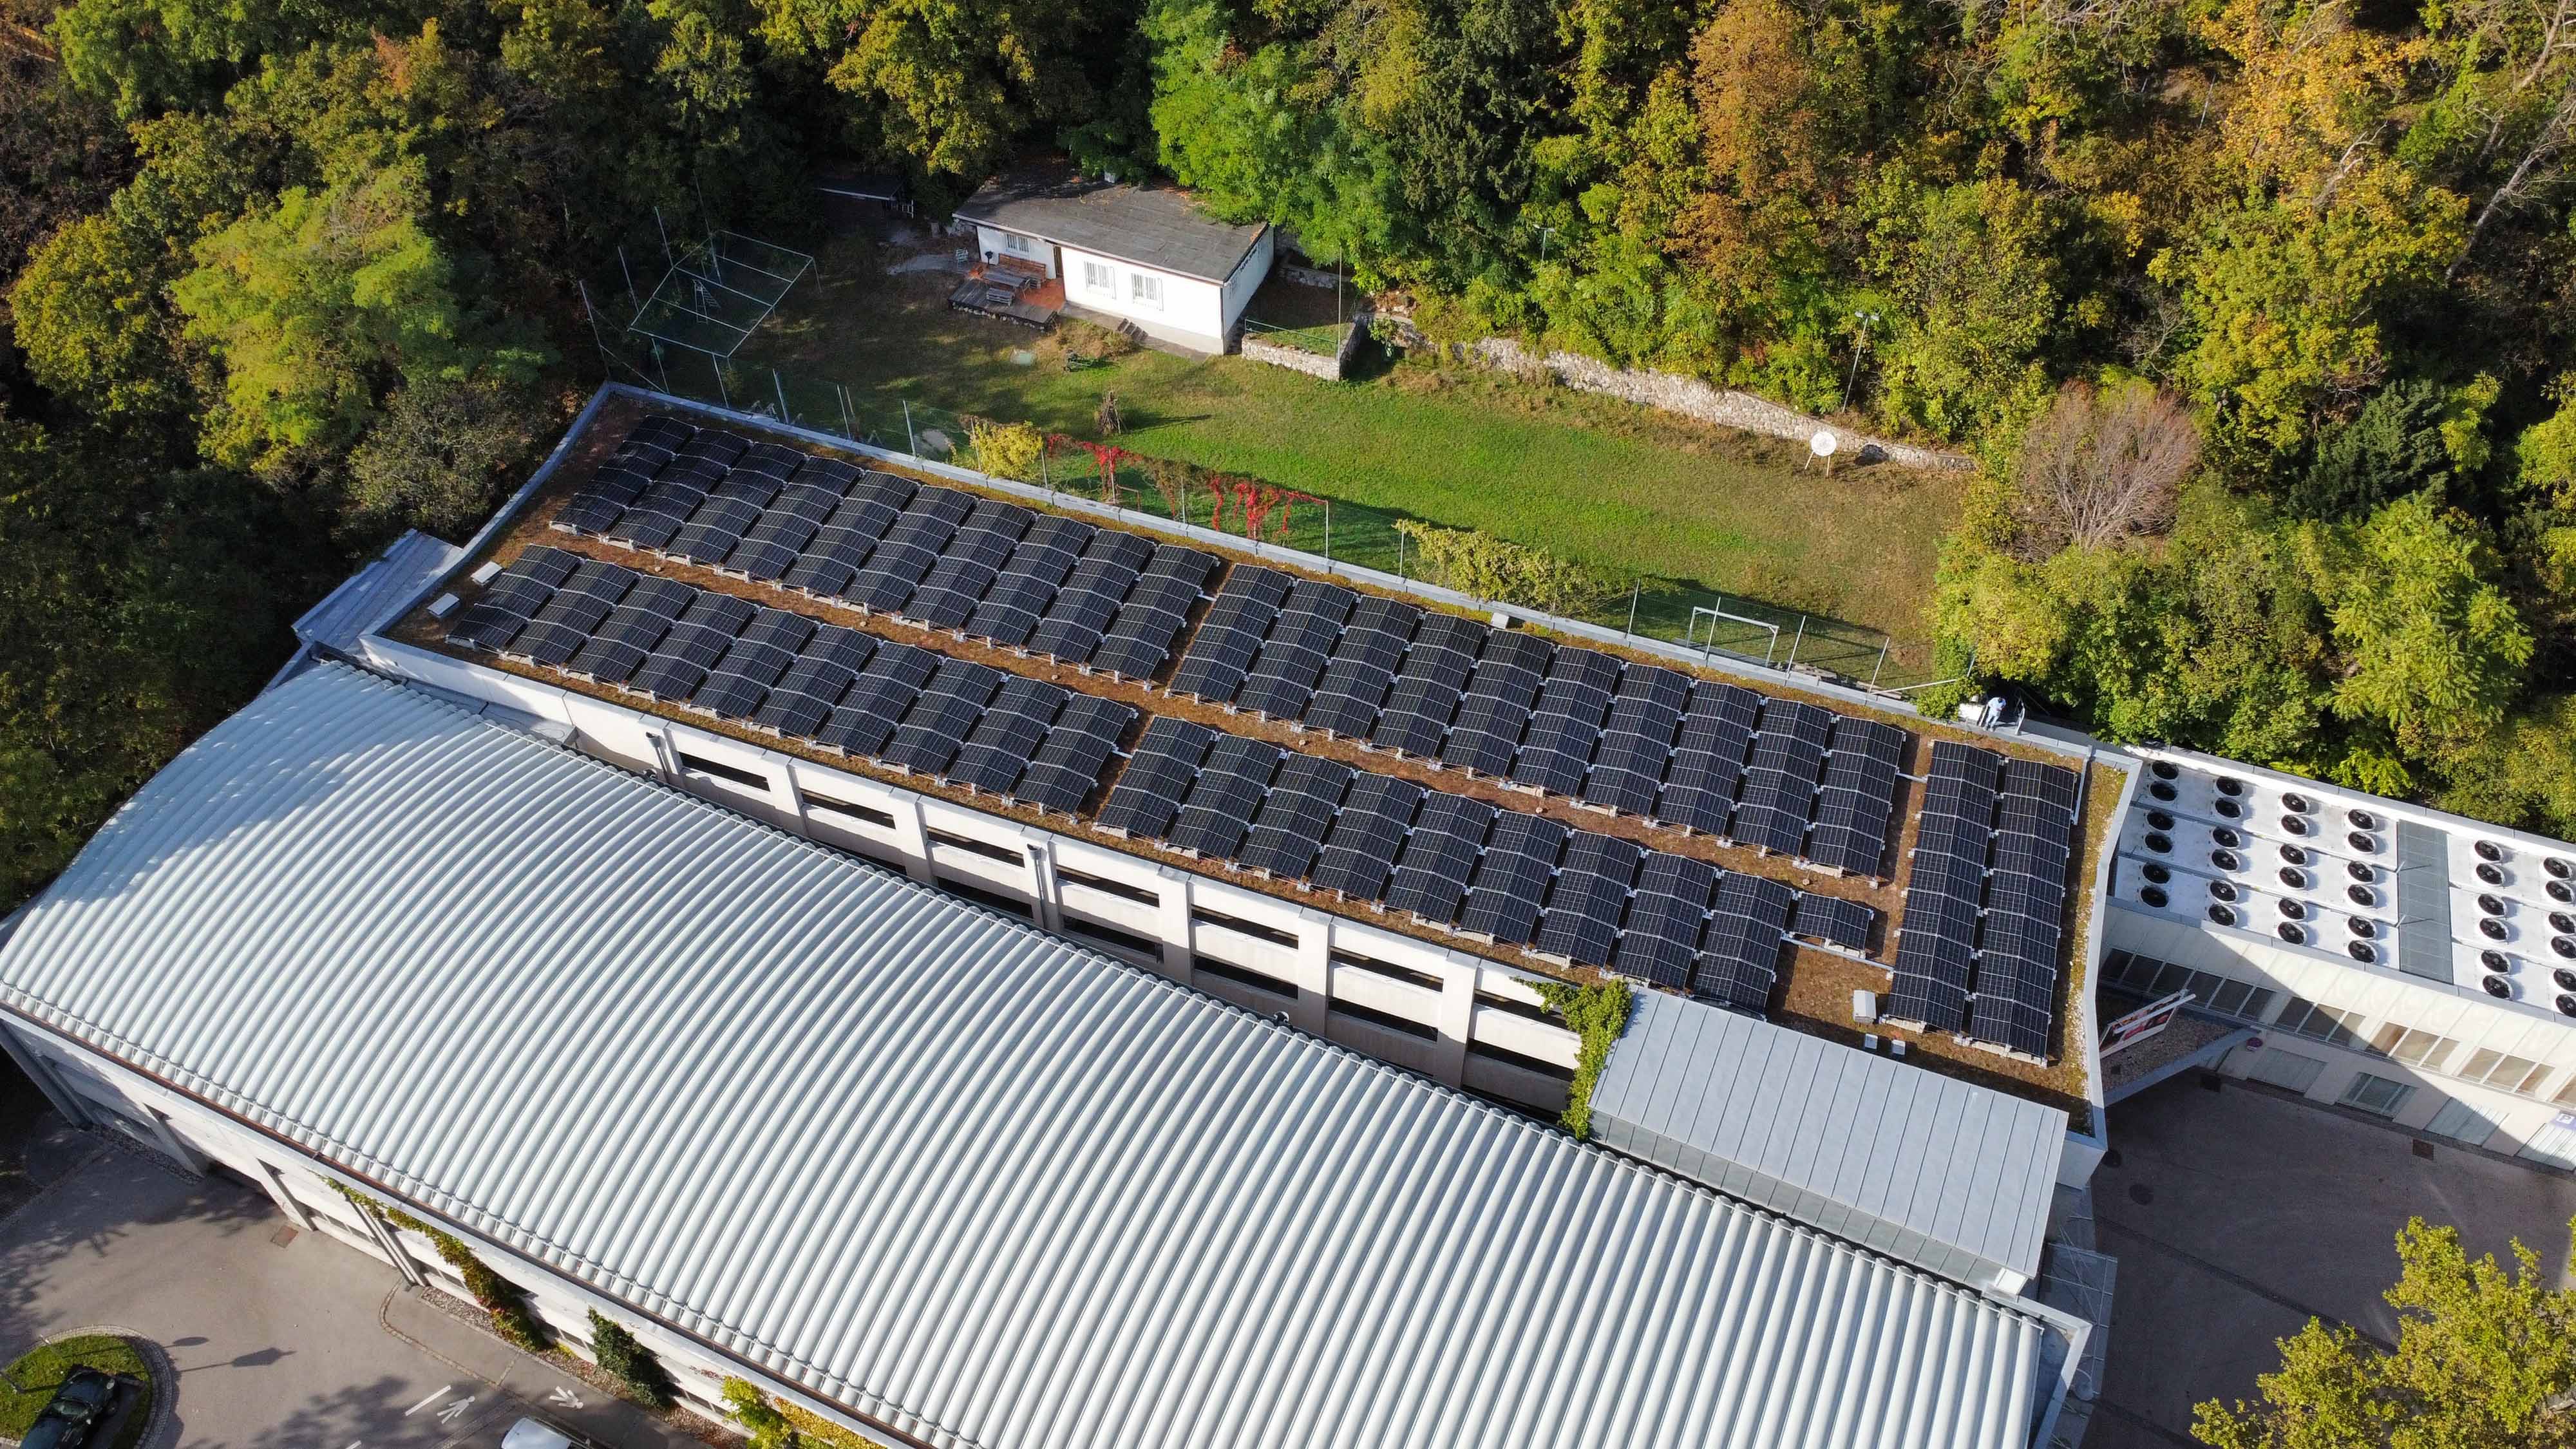 Bird's eye view of the Casino Baden garage roof, on which a photovoltaic system has been installed over the entire area.